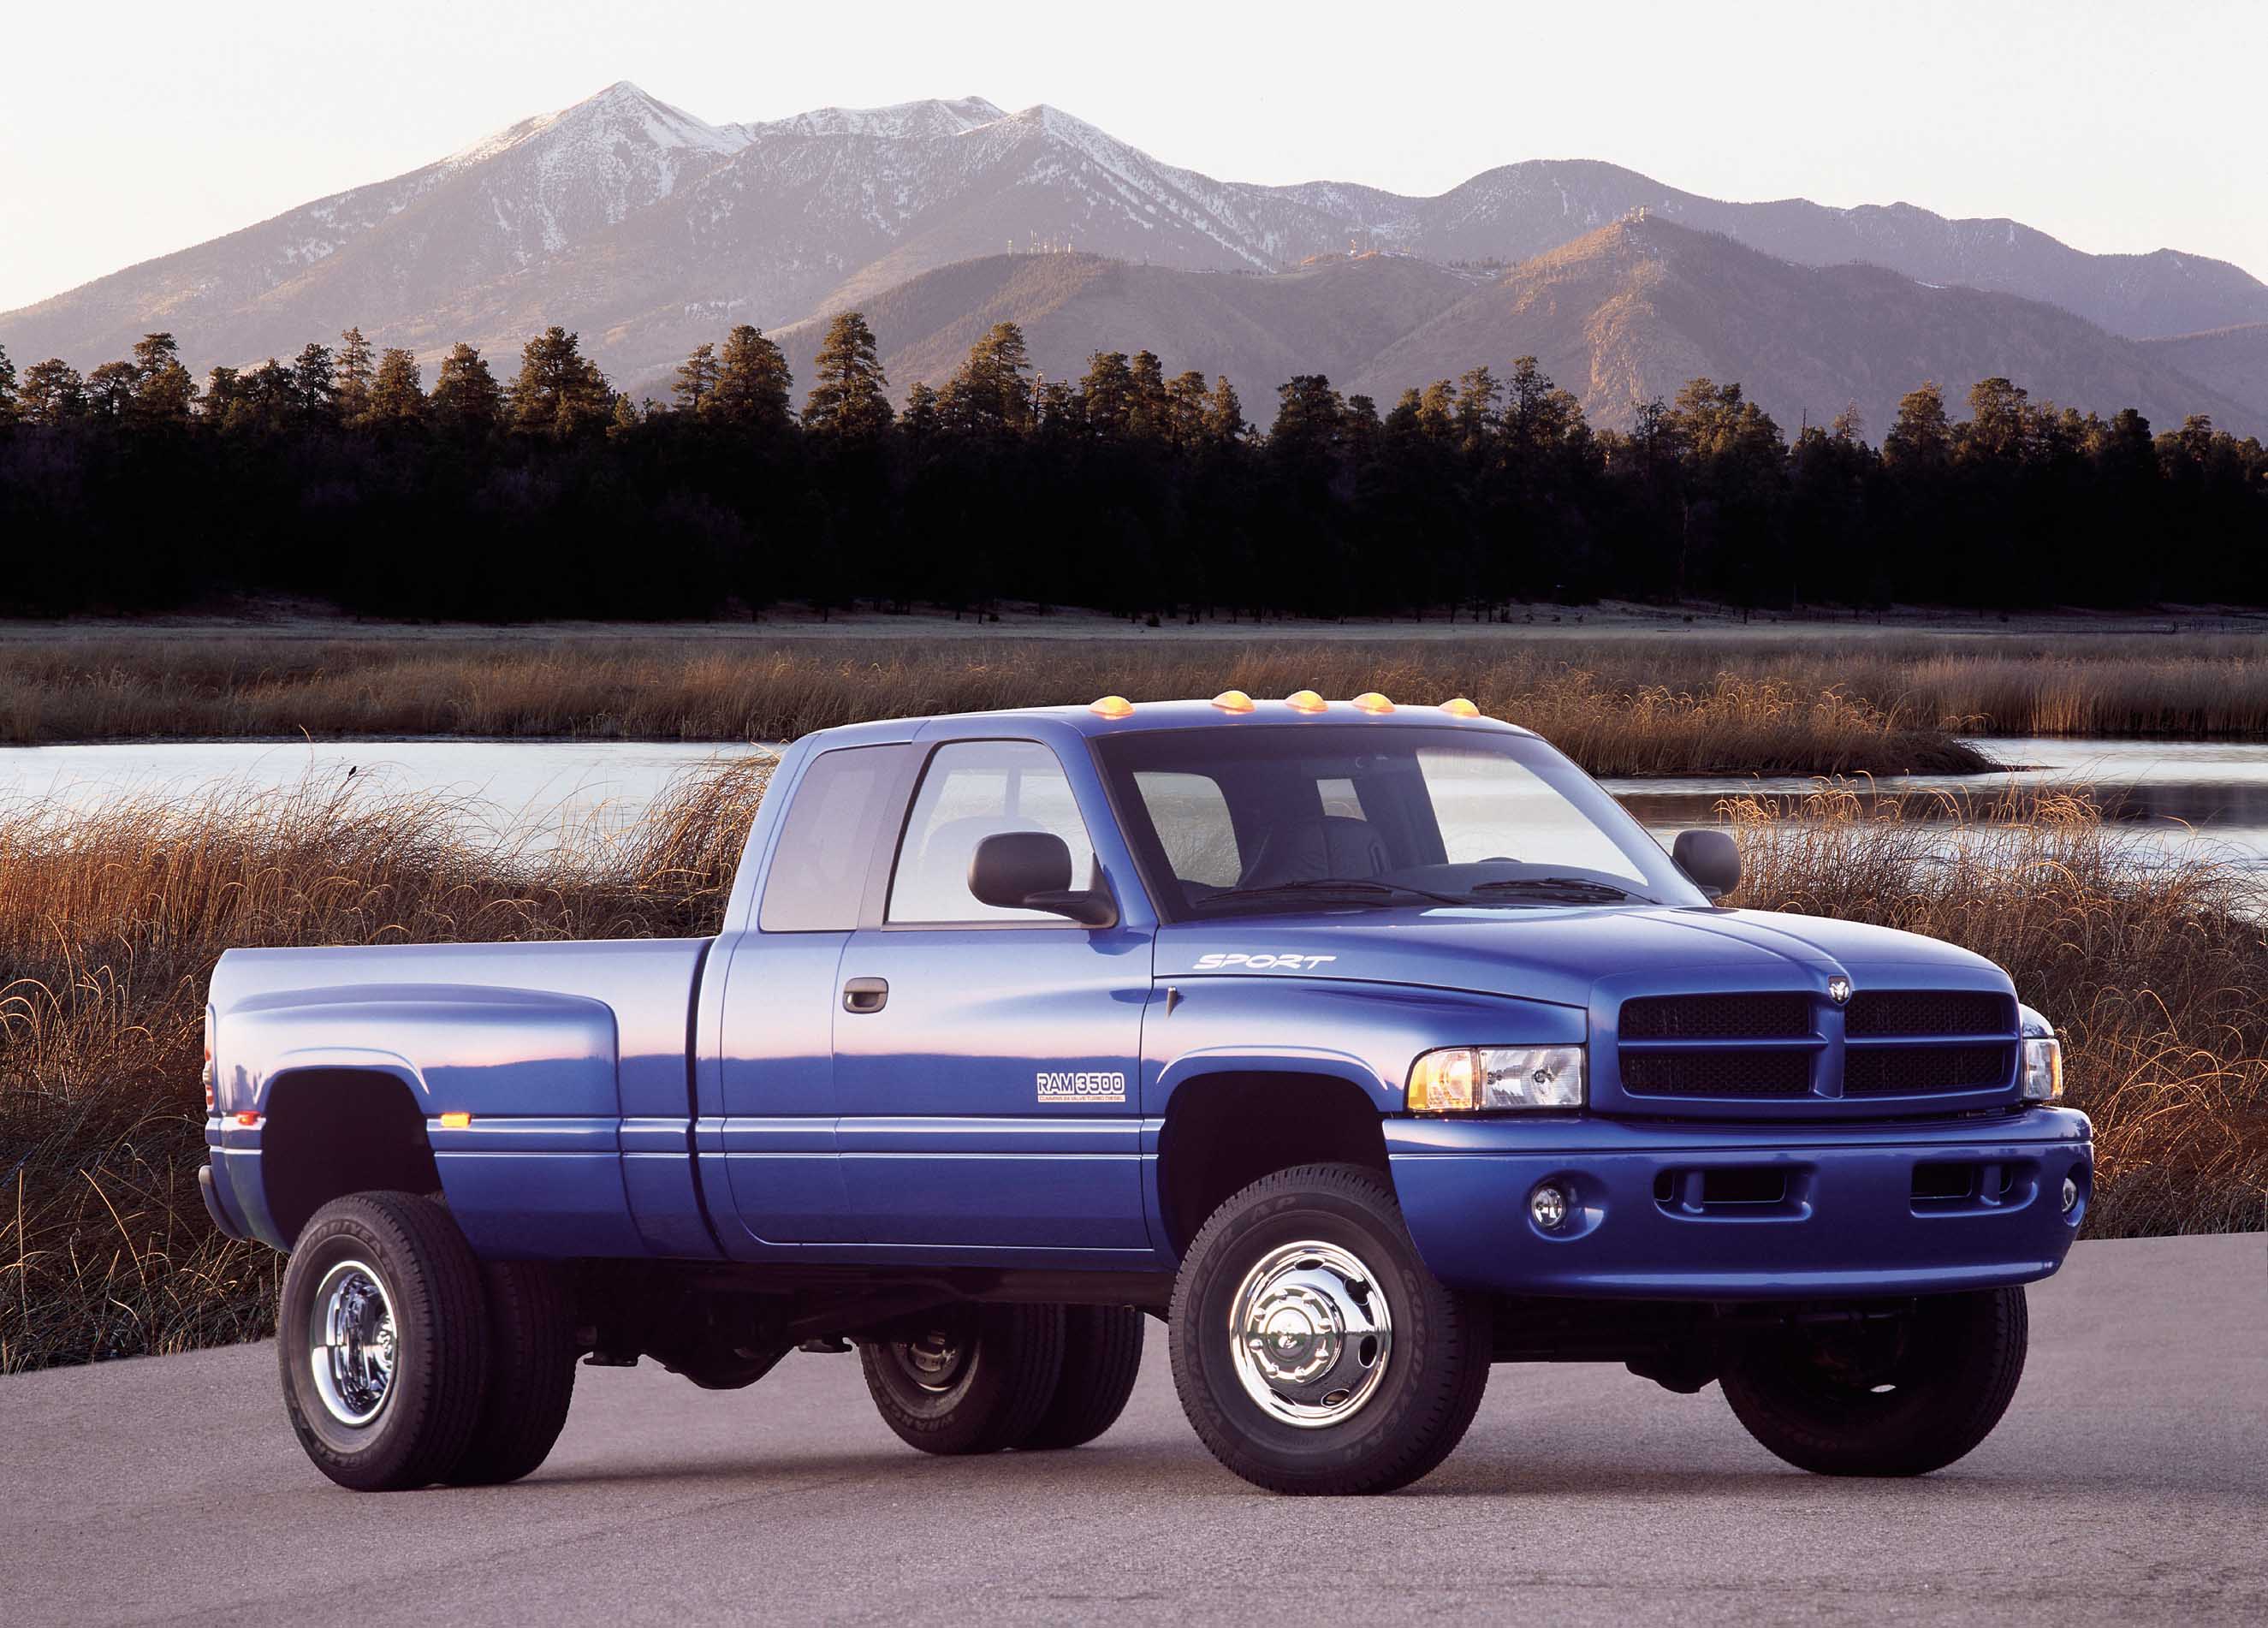 A blue 2001 Dodge Ram pickup truck with a second generation Cummins engine is parked by a lake with mountains in the background.